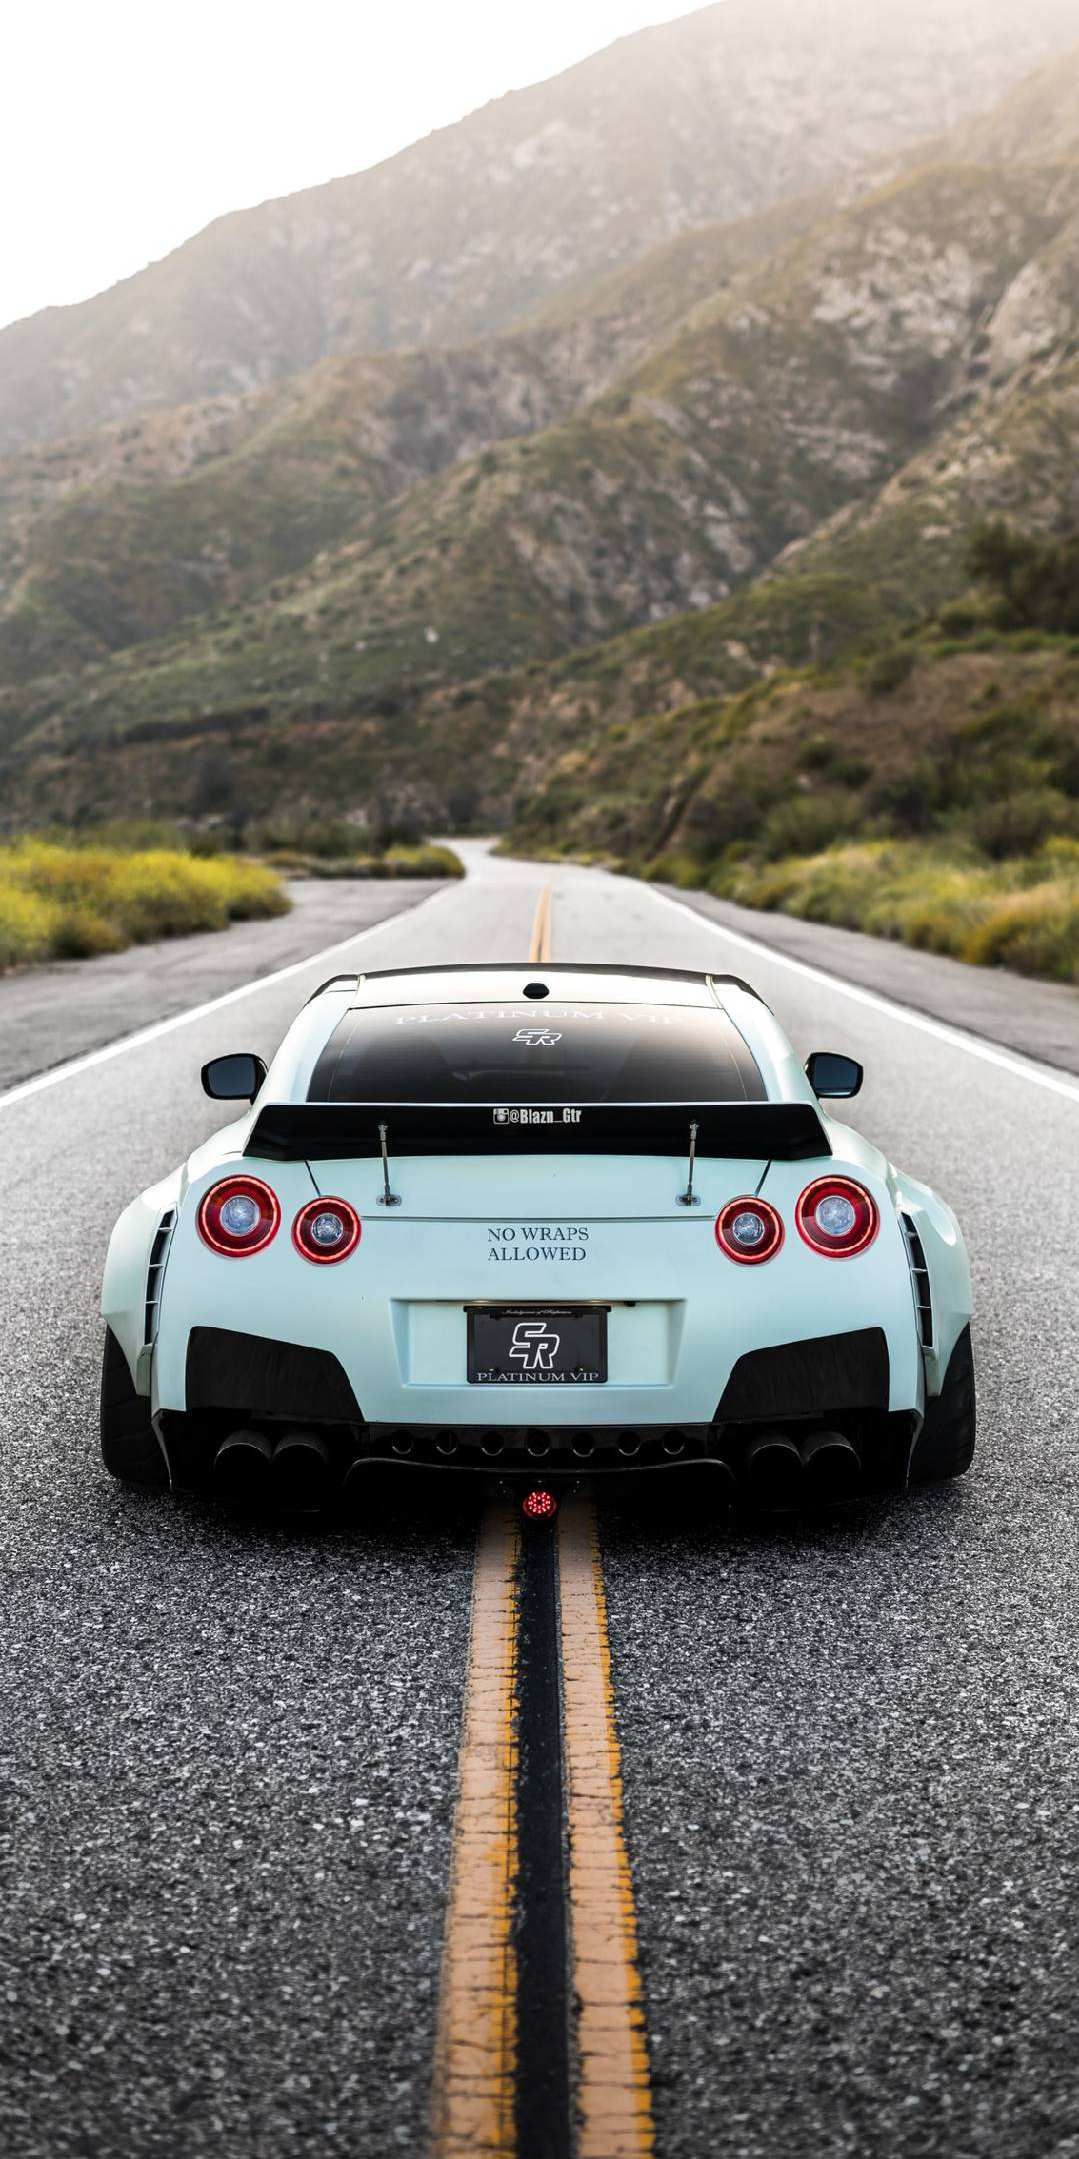 Nissan Gtr R35 Wallpaper / 750 Nissan R35 Gtr Picture Download Free Image / Download, share or upload your own one! Best Drop Fade Hairstyles